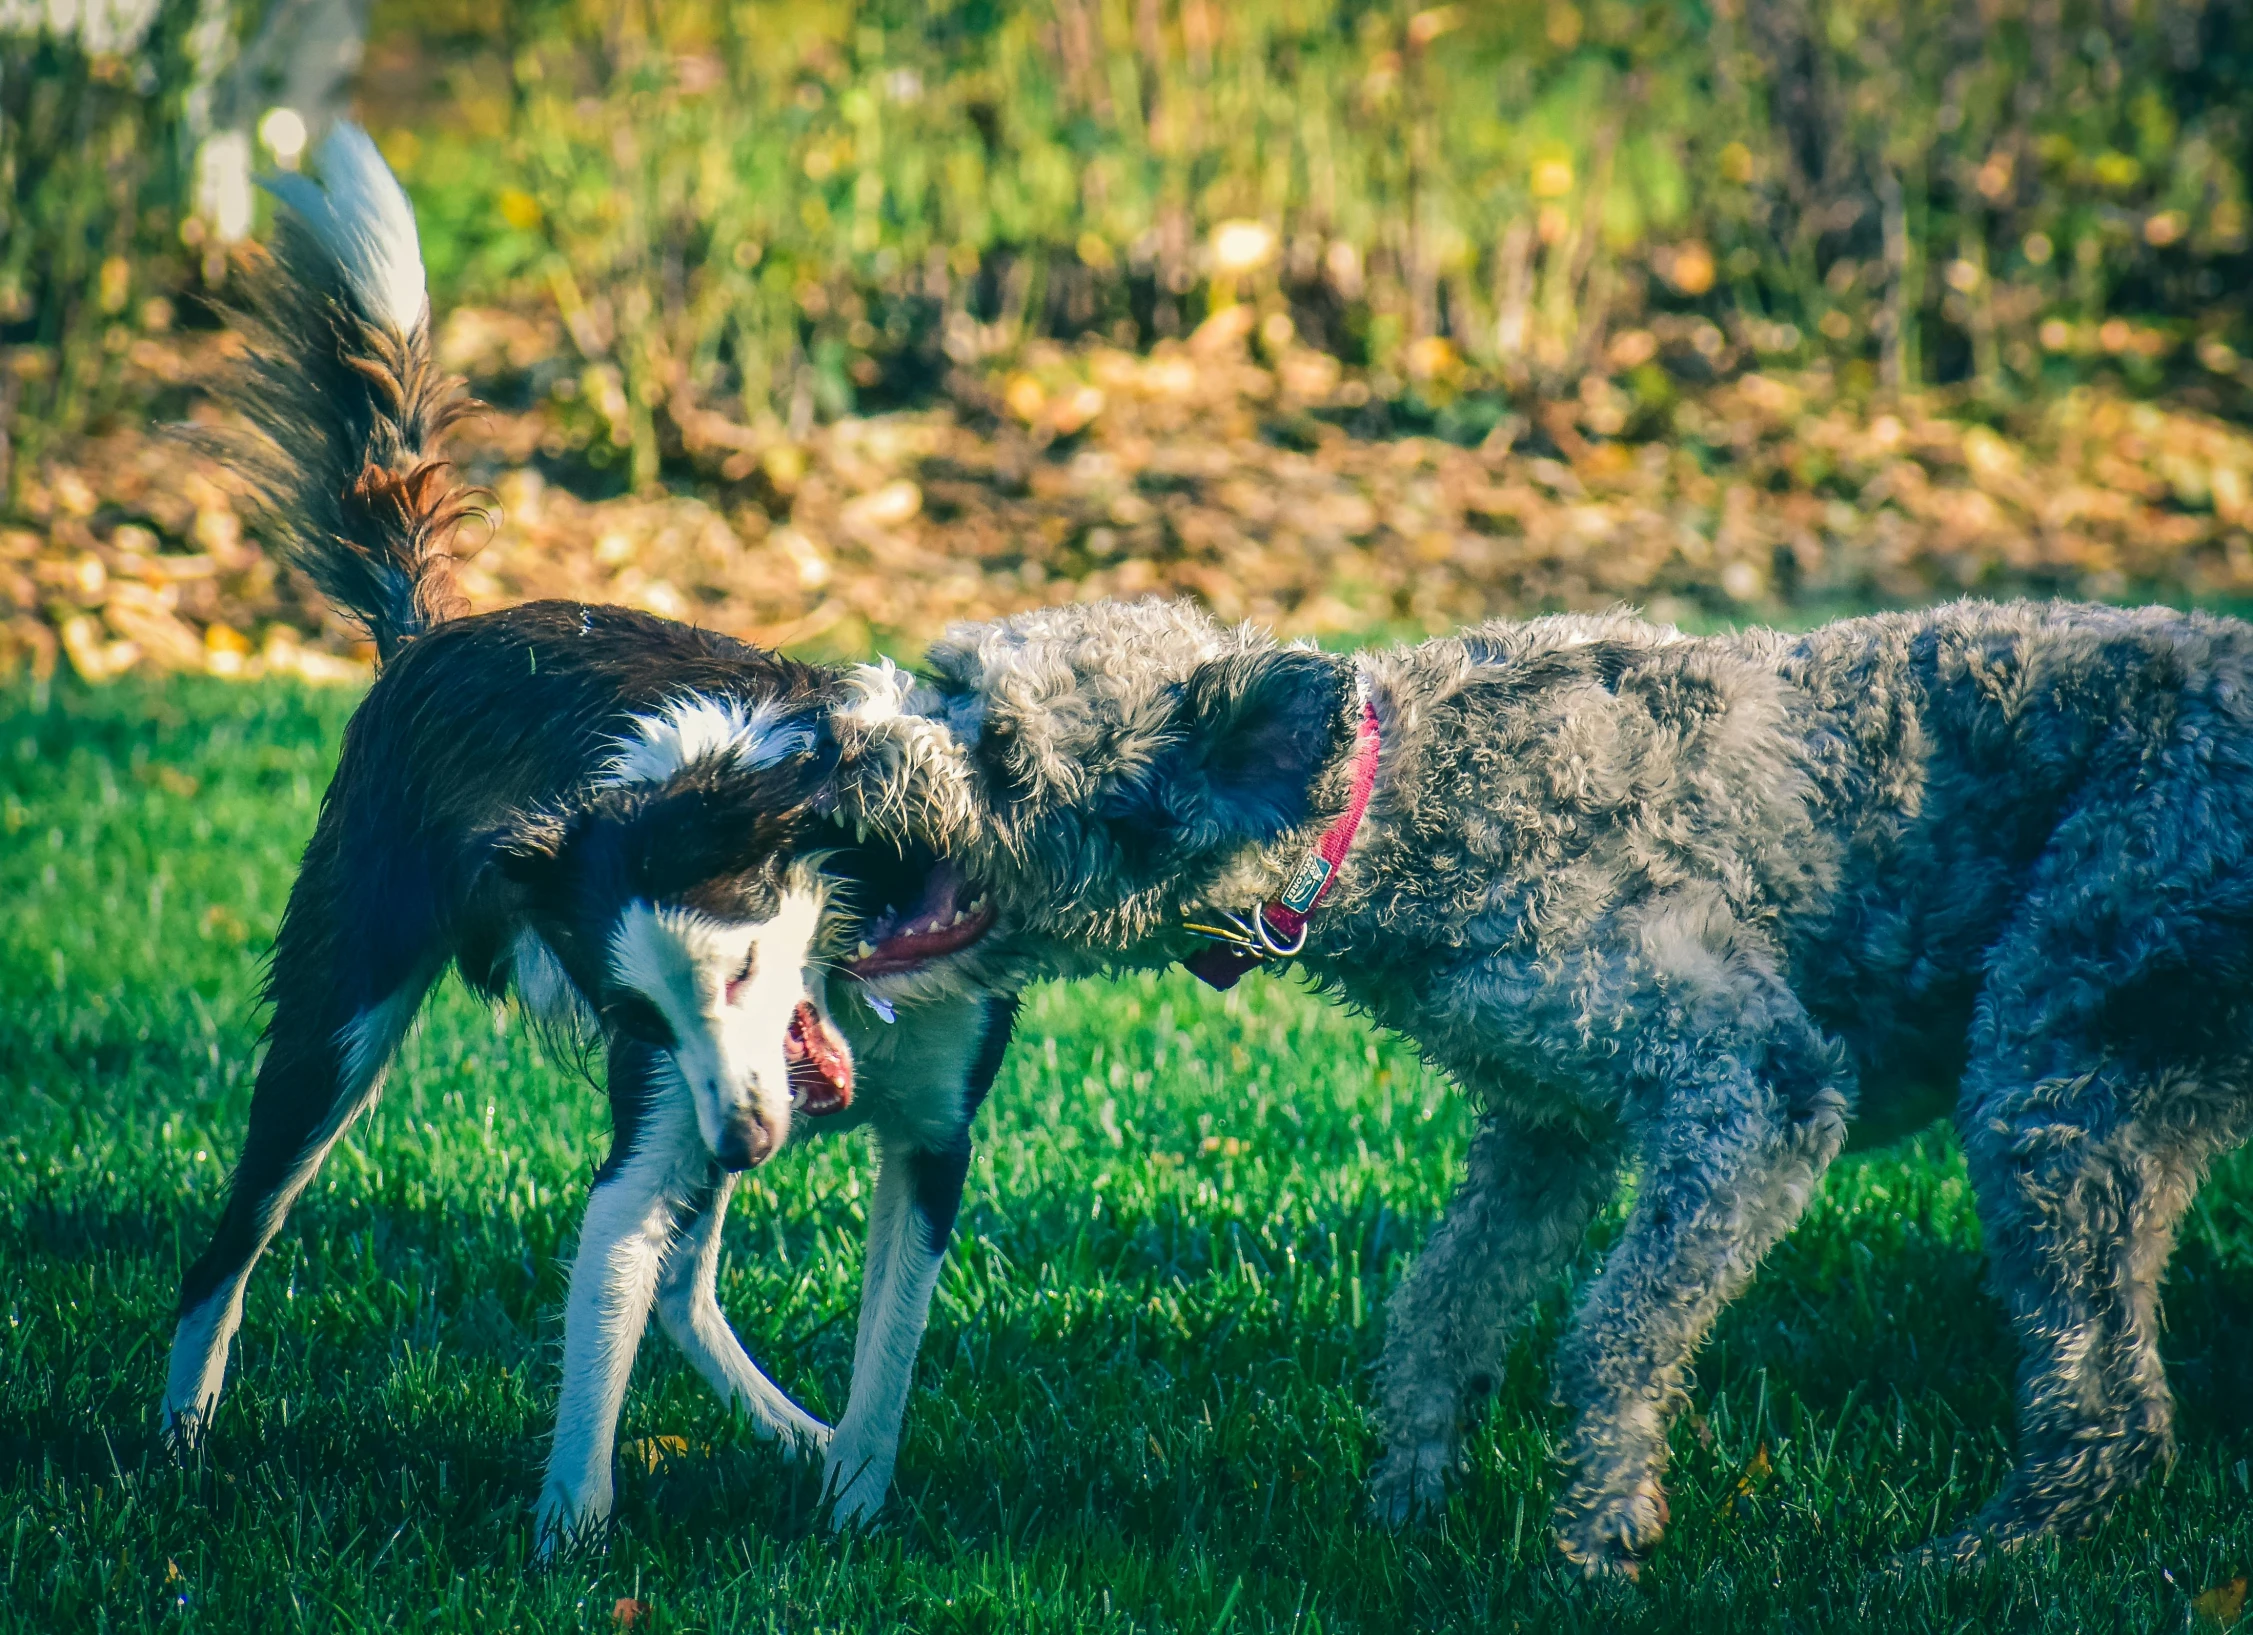 two dogs playing with a frisbee in the grass, a photo, pexels, happening, kissing each other, bushy tail, thumbnail, pixelated